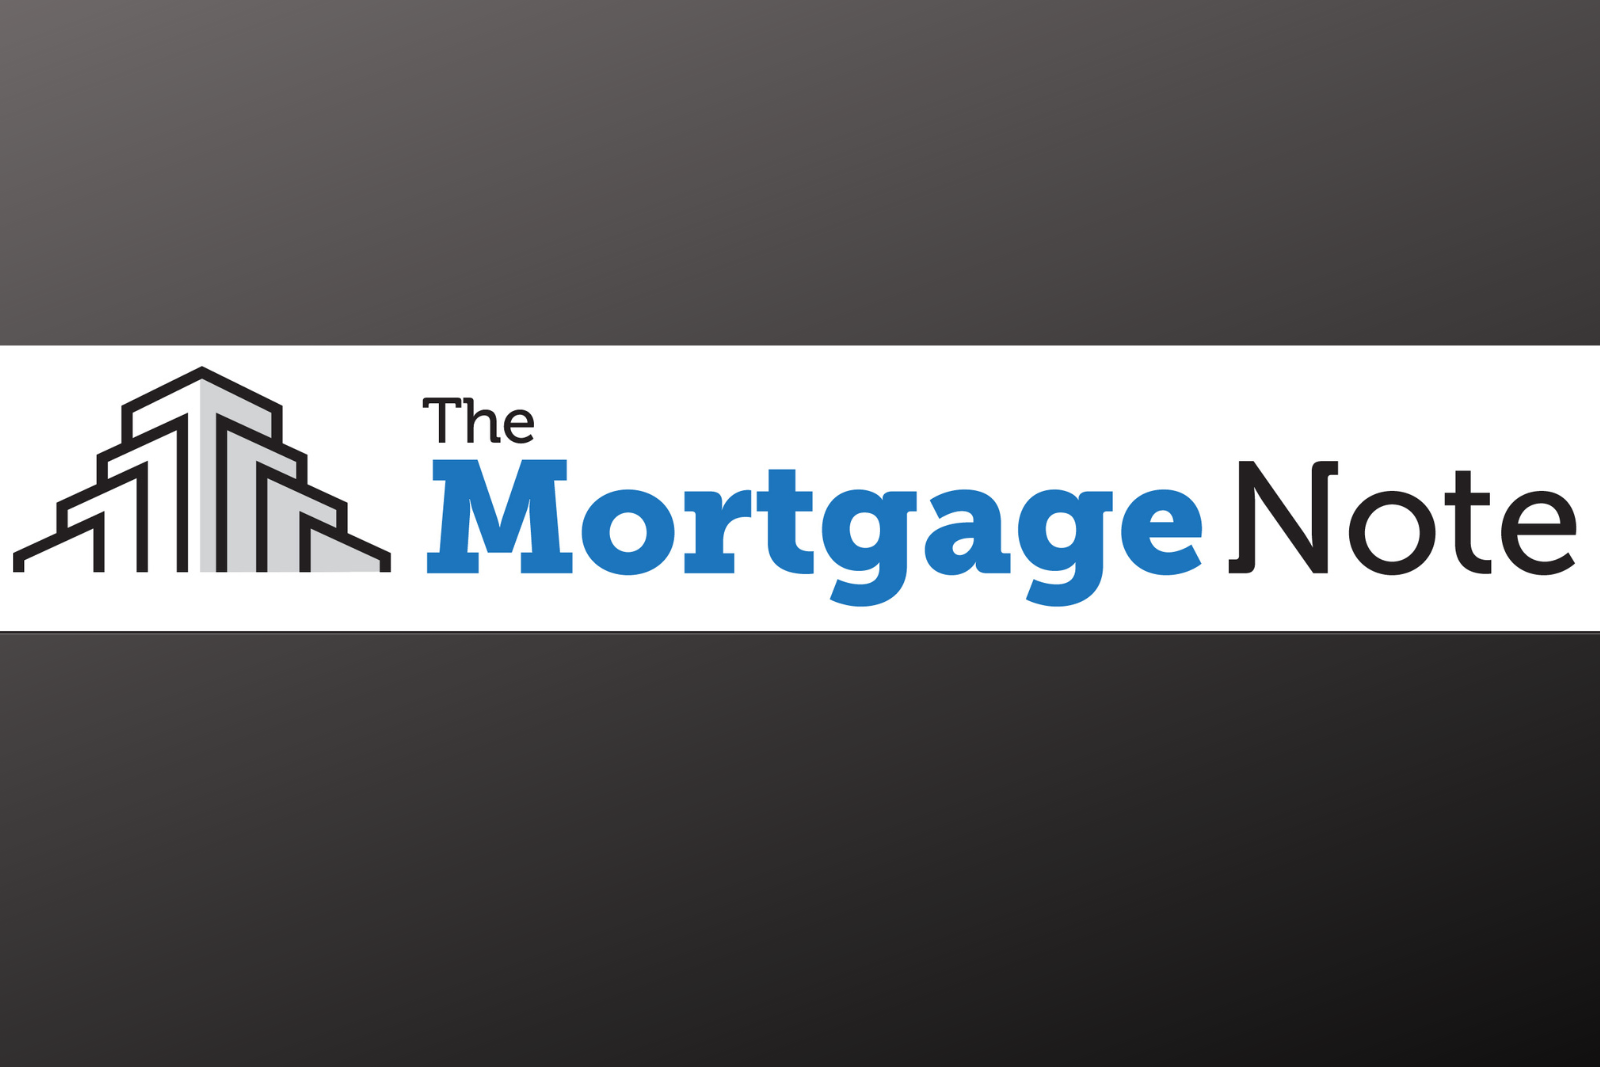 Listen To The Mortgage Note Podcast